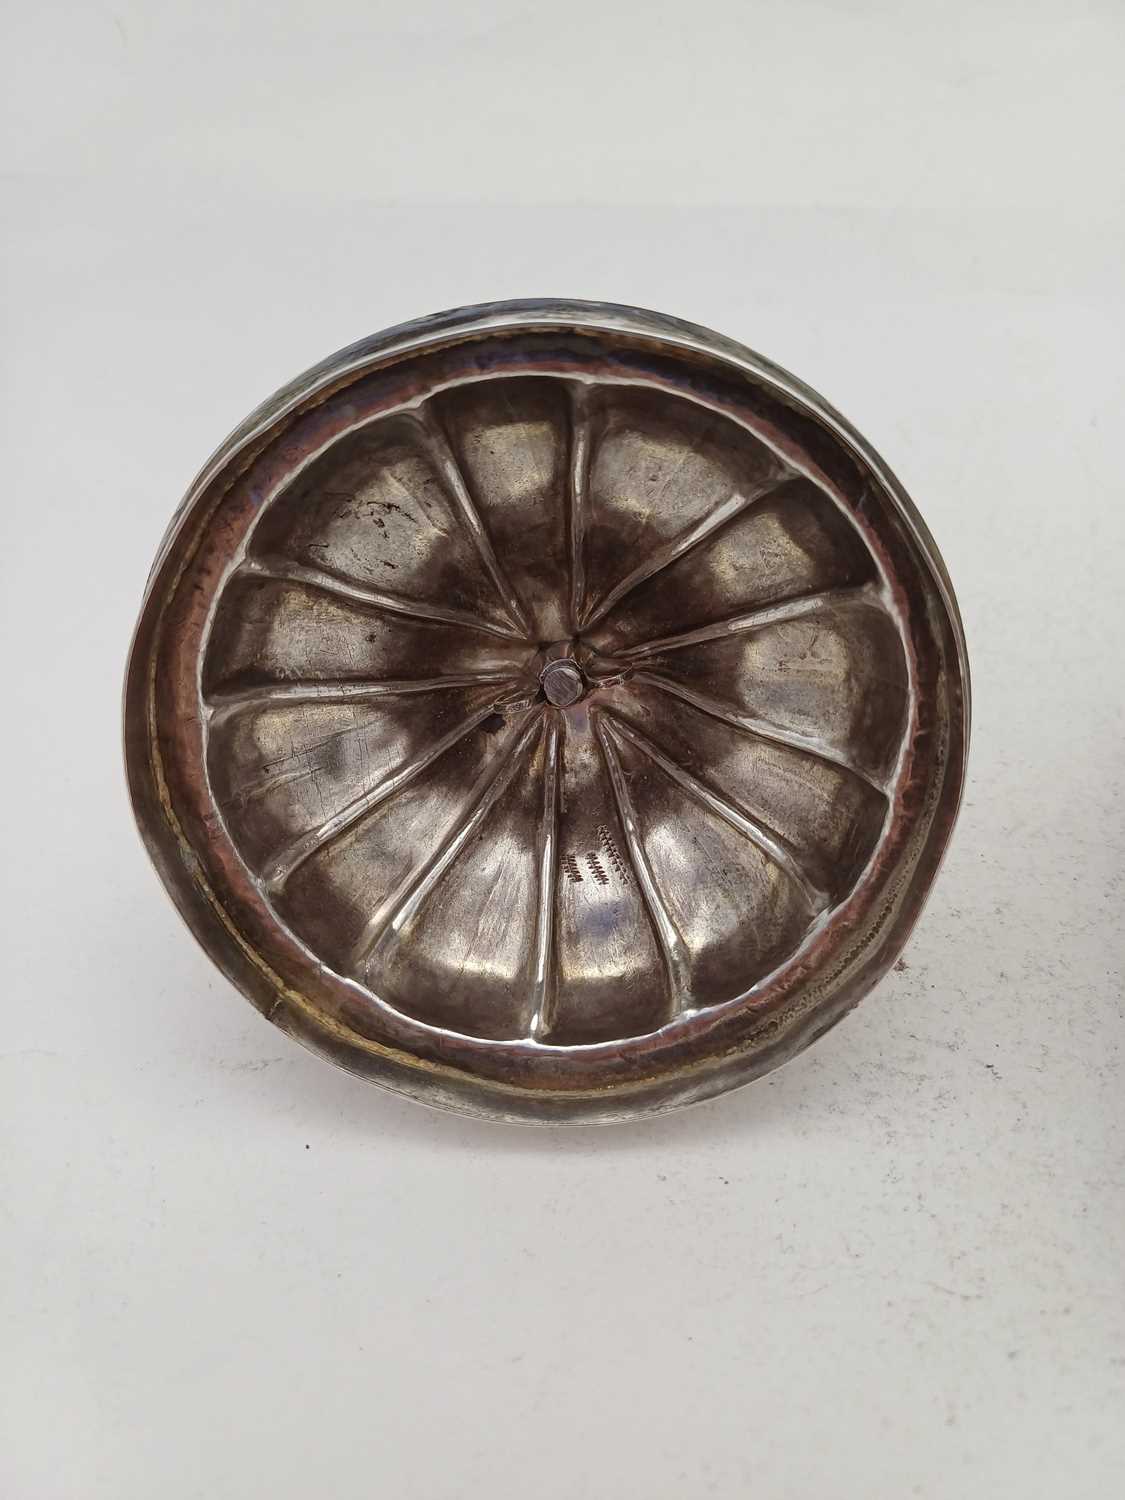 A Maltese Silver Sugar-Bowl and Cover, Maker's Mark Indistinct, 20th Century - Image 5 of 7